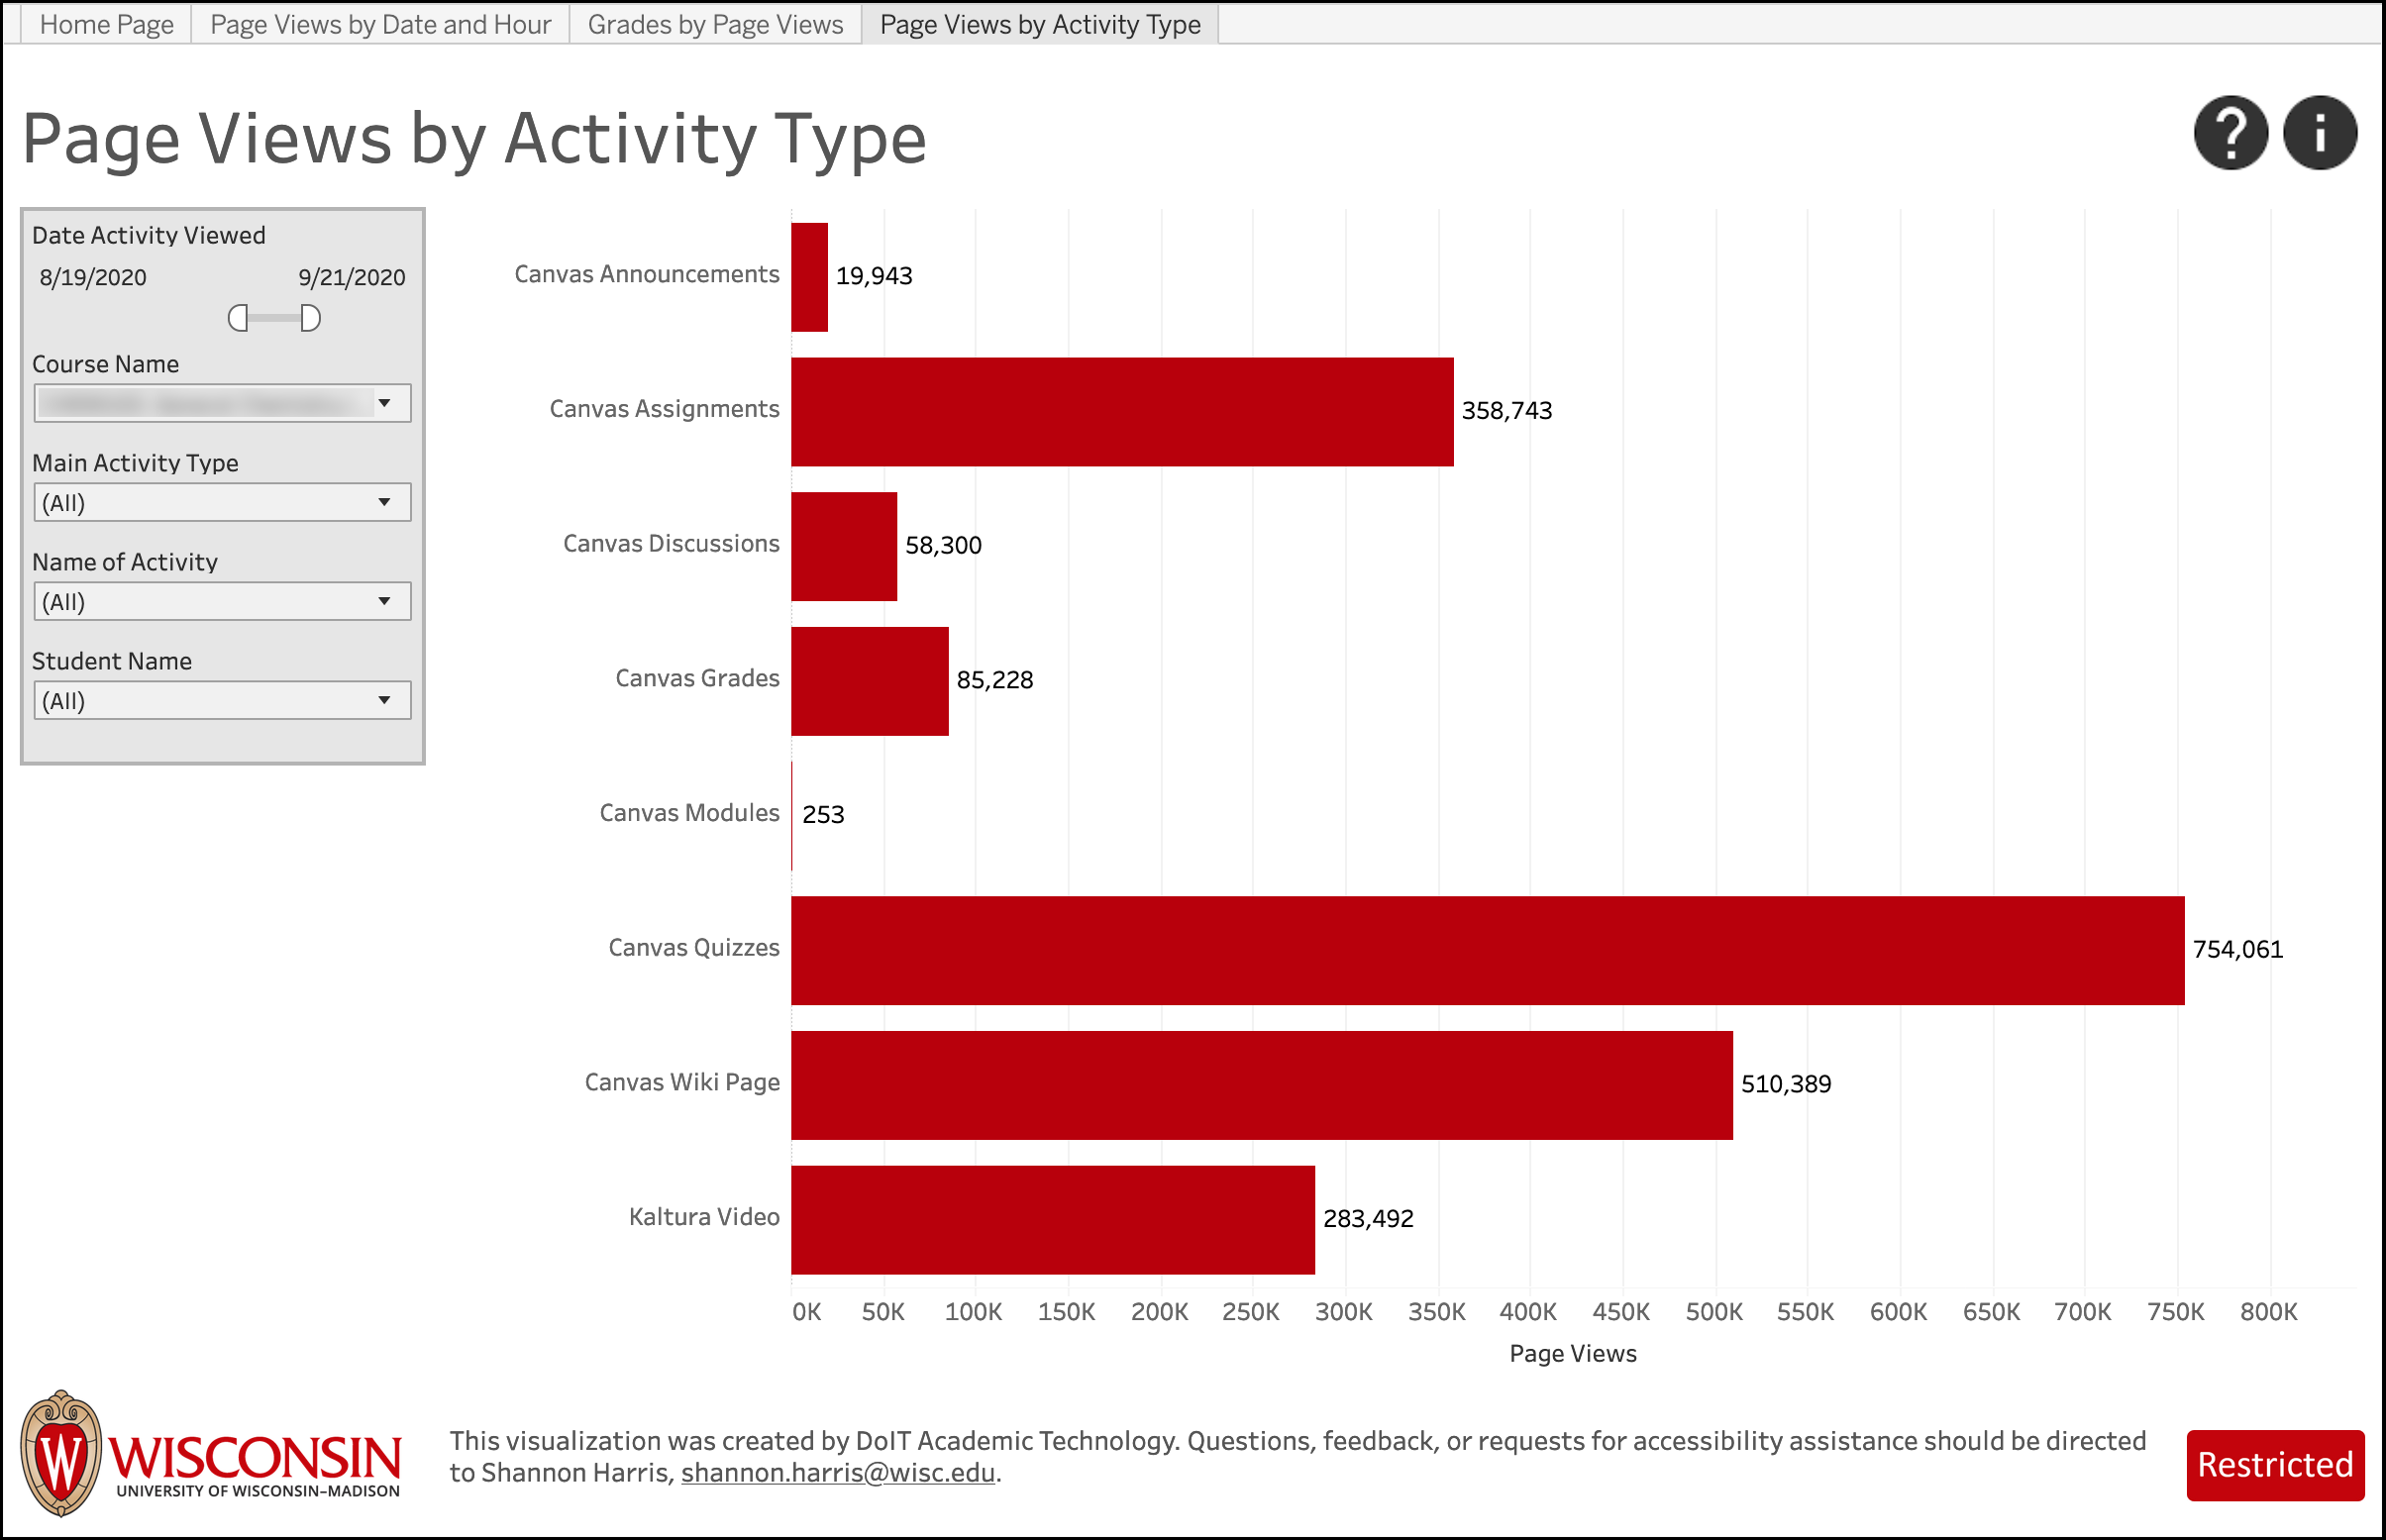 LEAD screenshot - Page Views by Activity Type